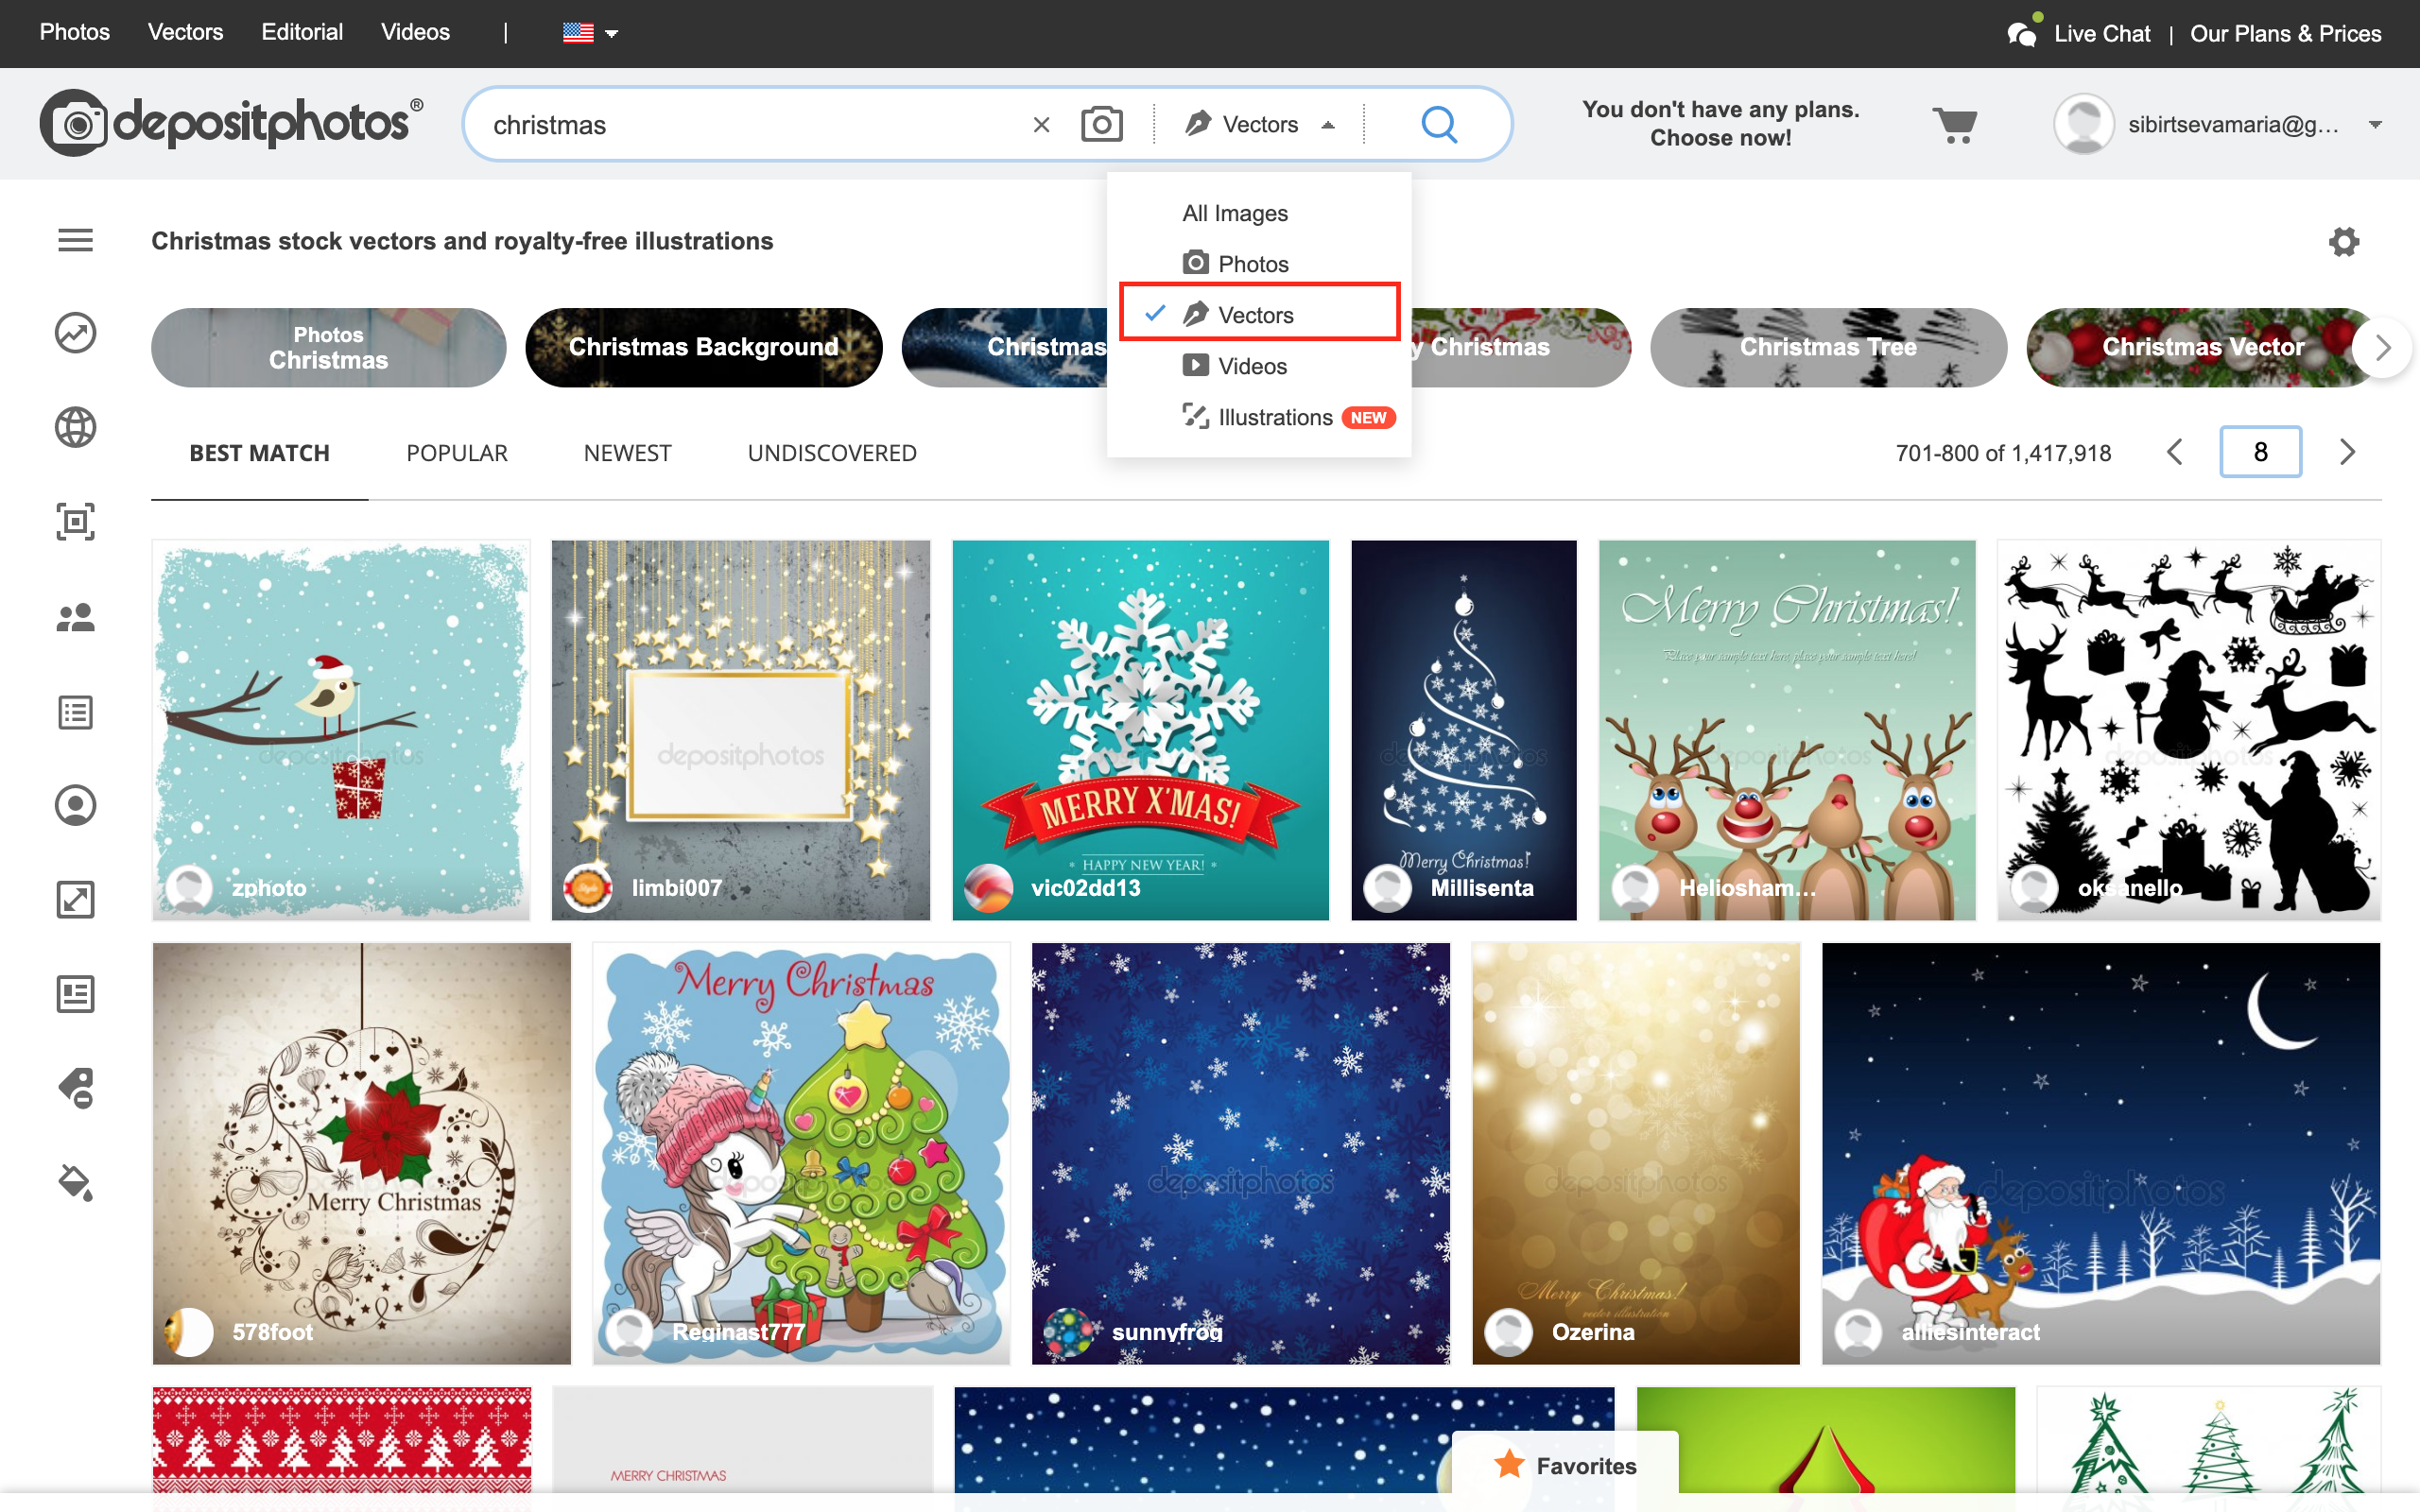 Looking for illustrations? Try our new search filter